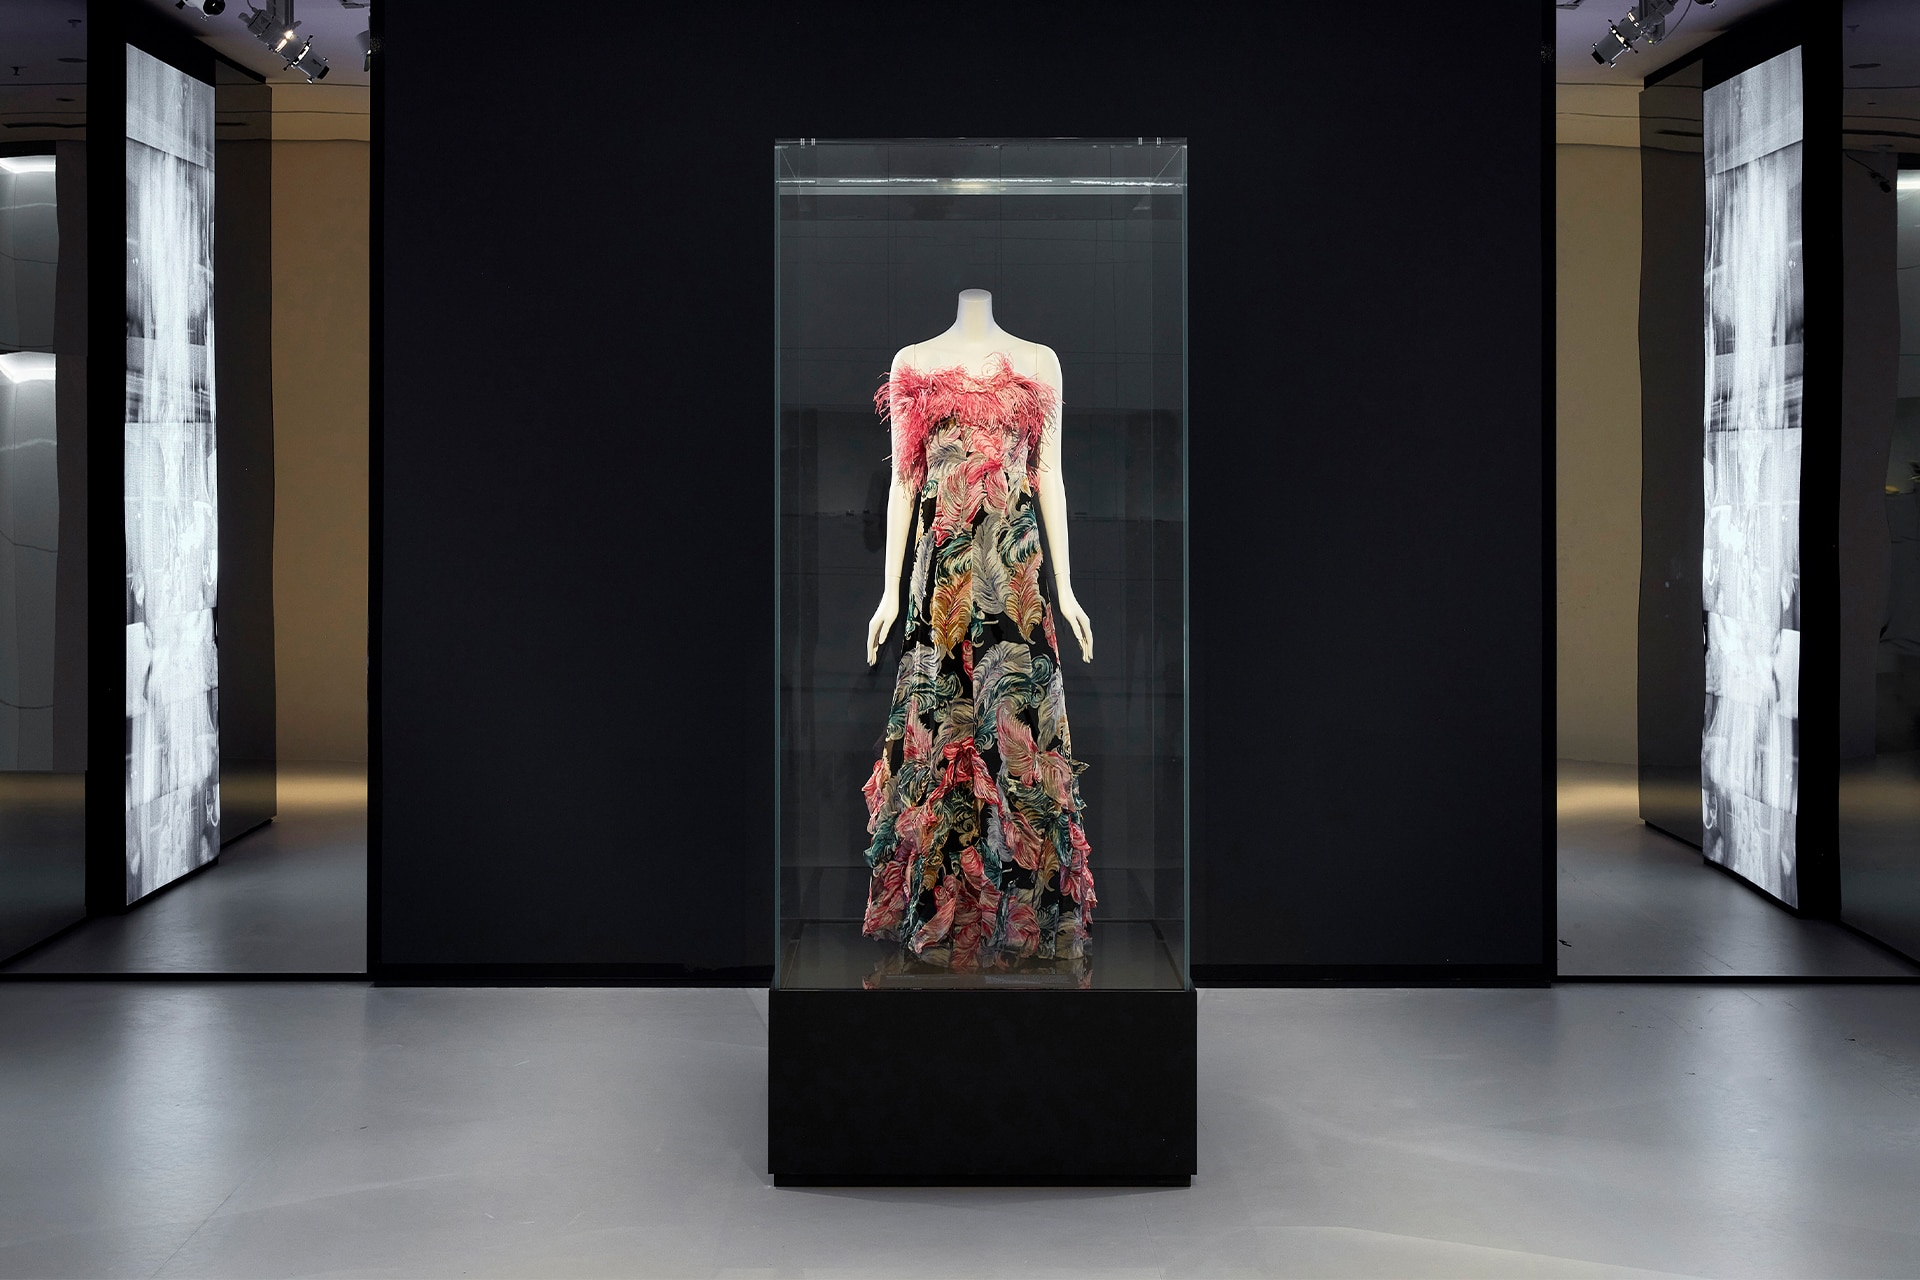 NGV Chanel exhibition opens December 4: What to expect